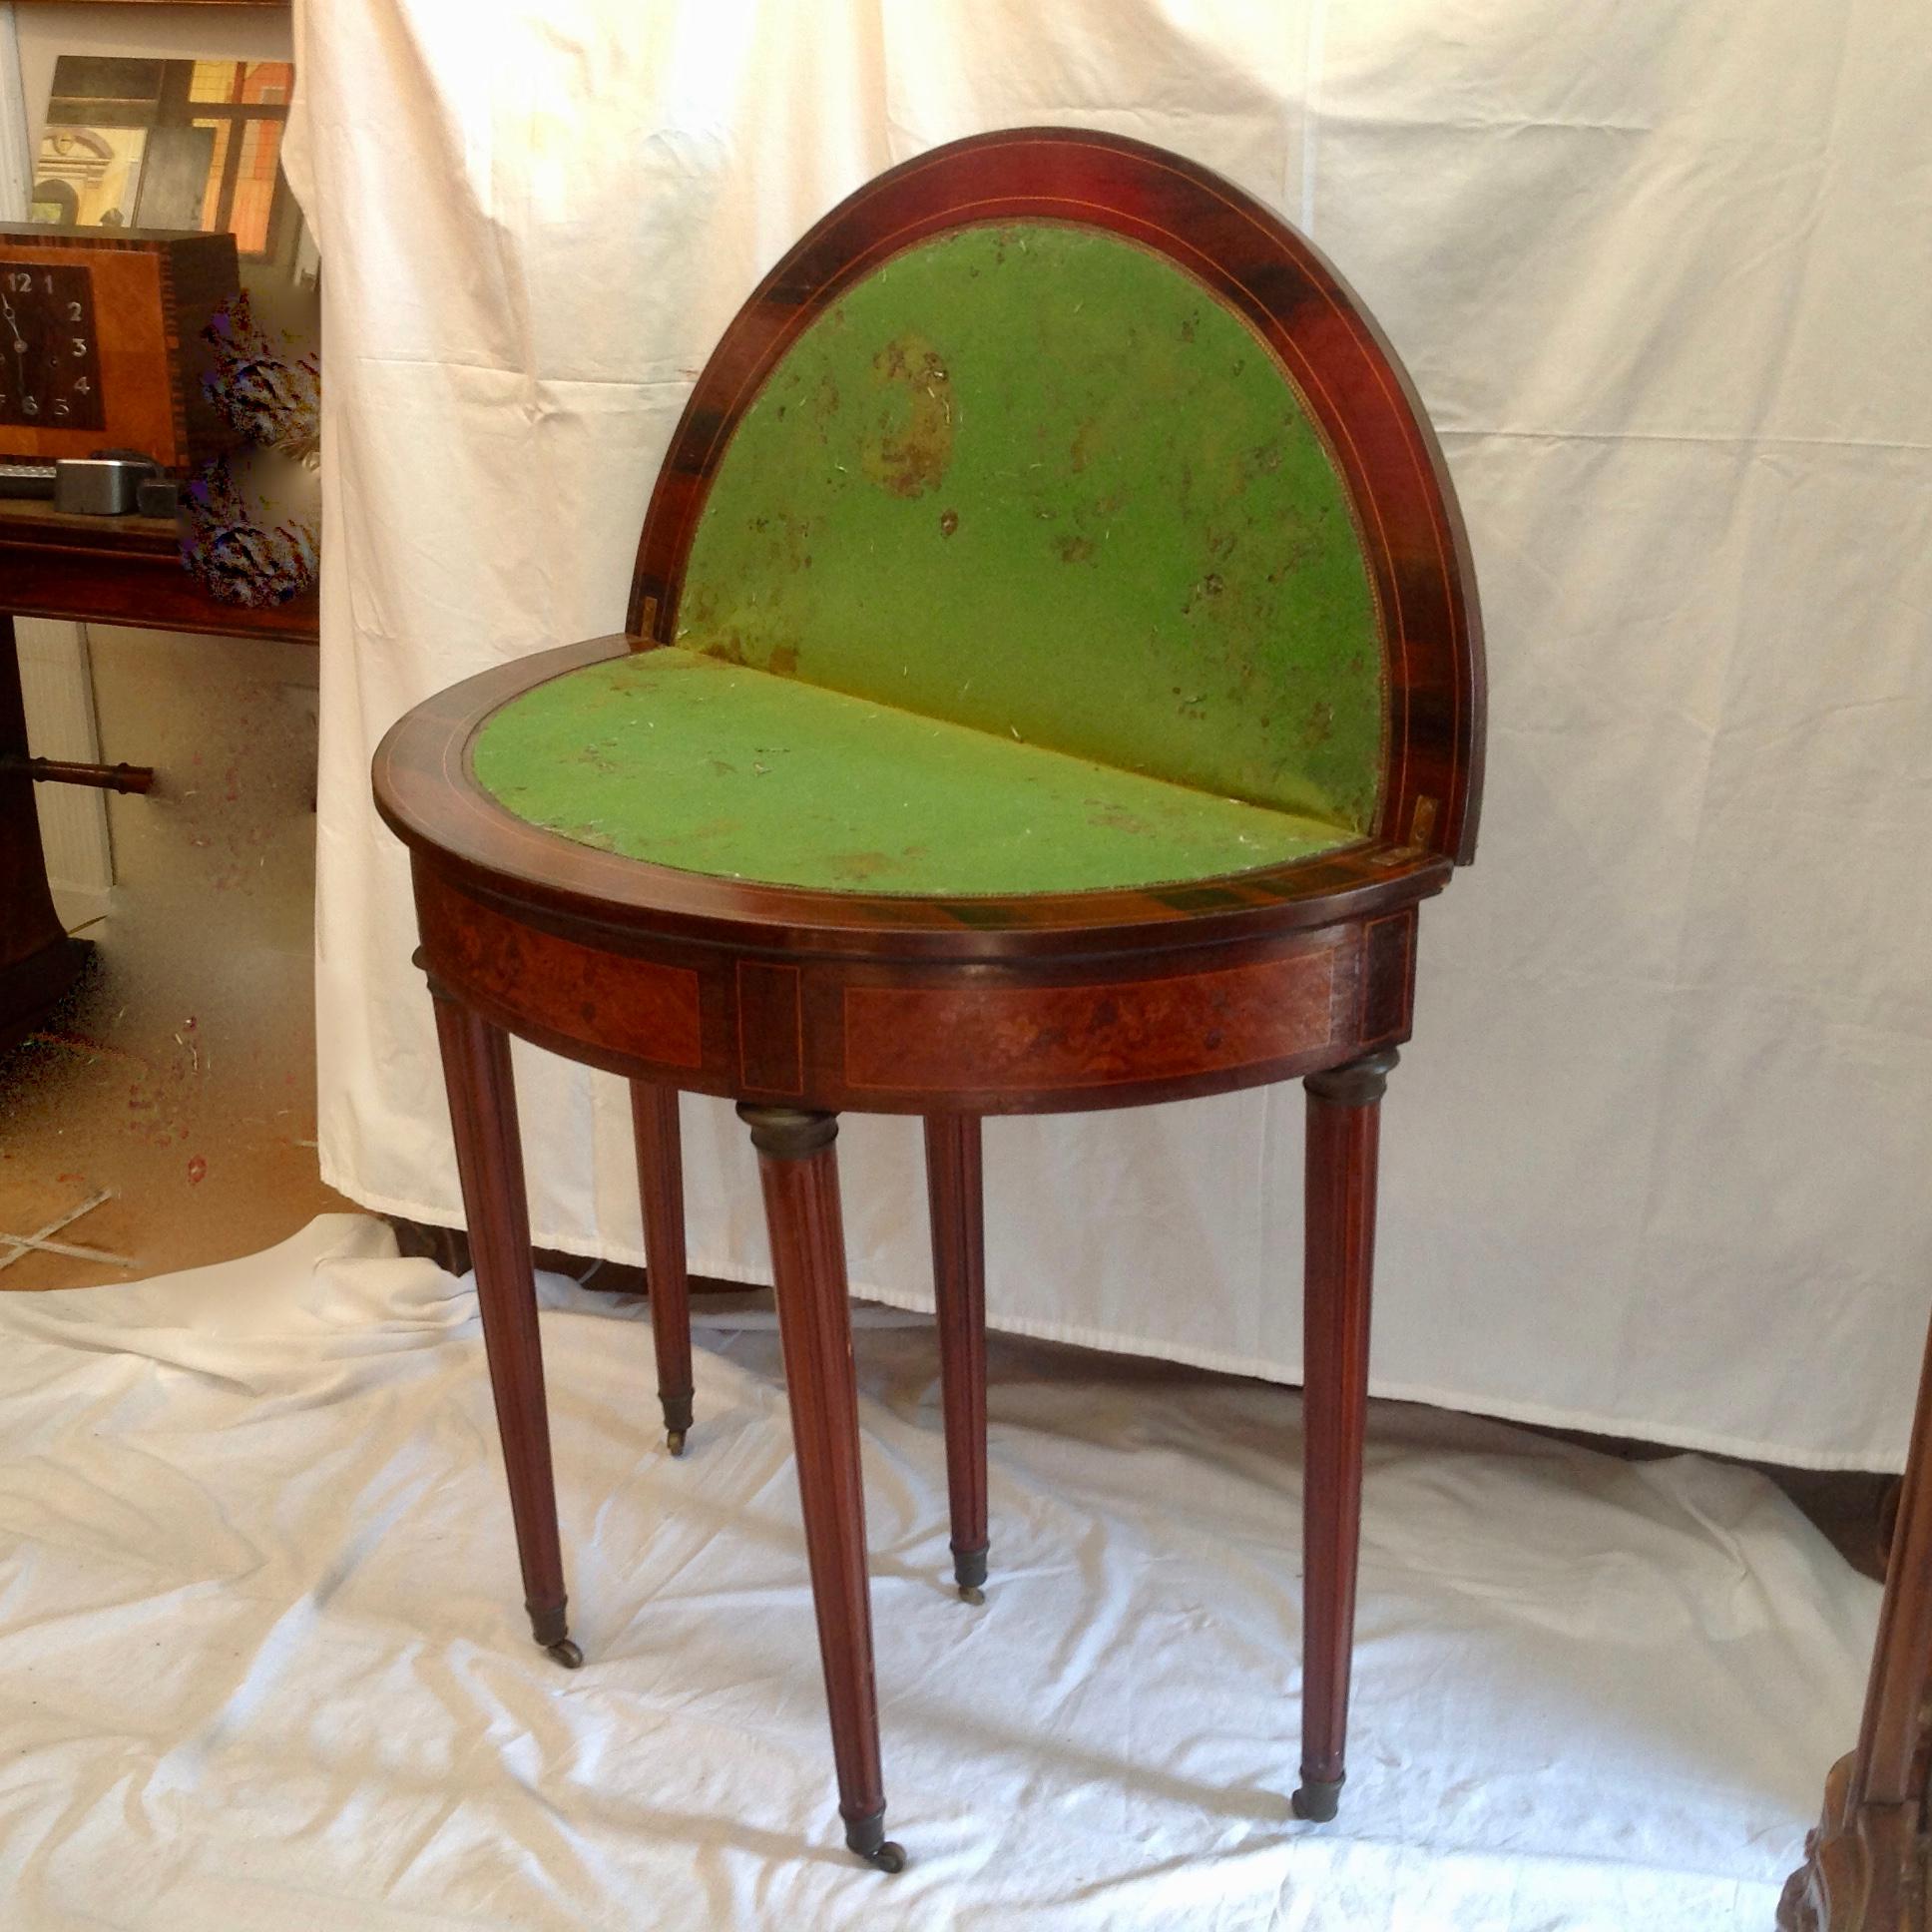 This is a very nice Louis XVI style demilune, with satinwood marquetry, flip top game table.
Having a well-worn green baize playing surface. The table is raised upon fine turned legs with brass castors, brass to the top of the legs, and also the